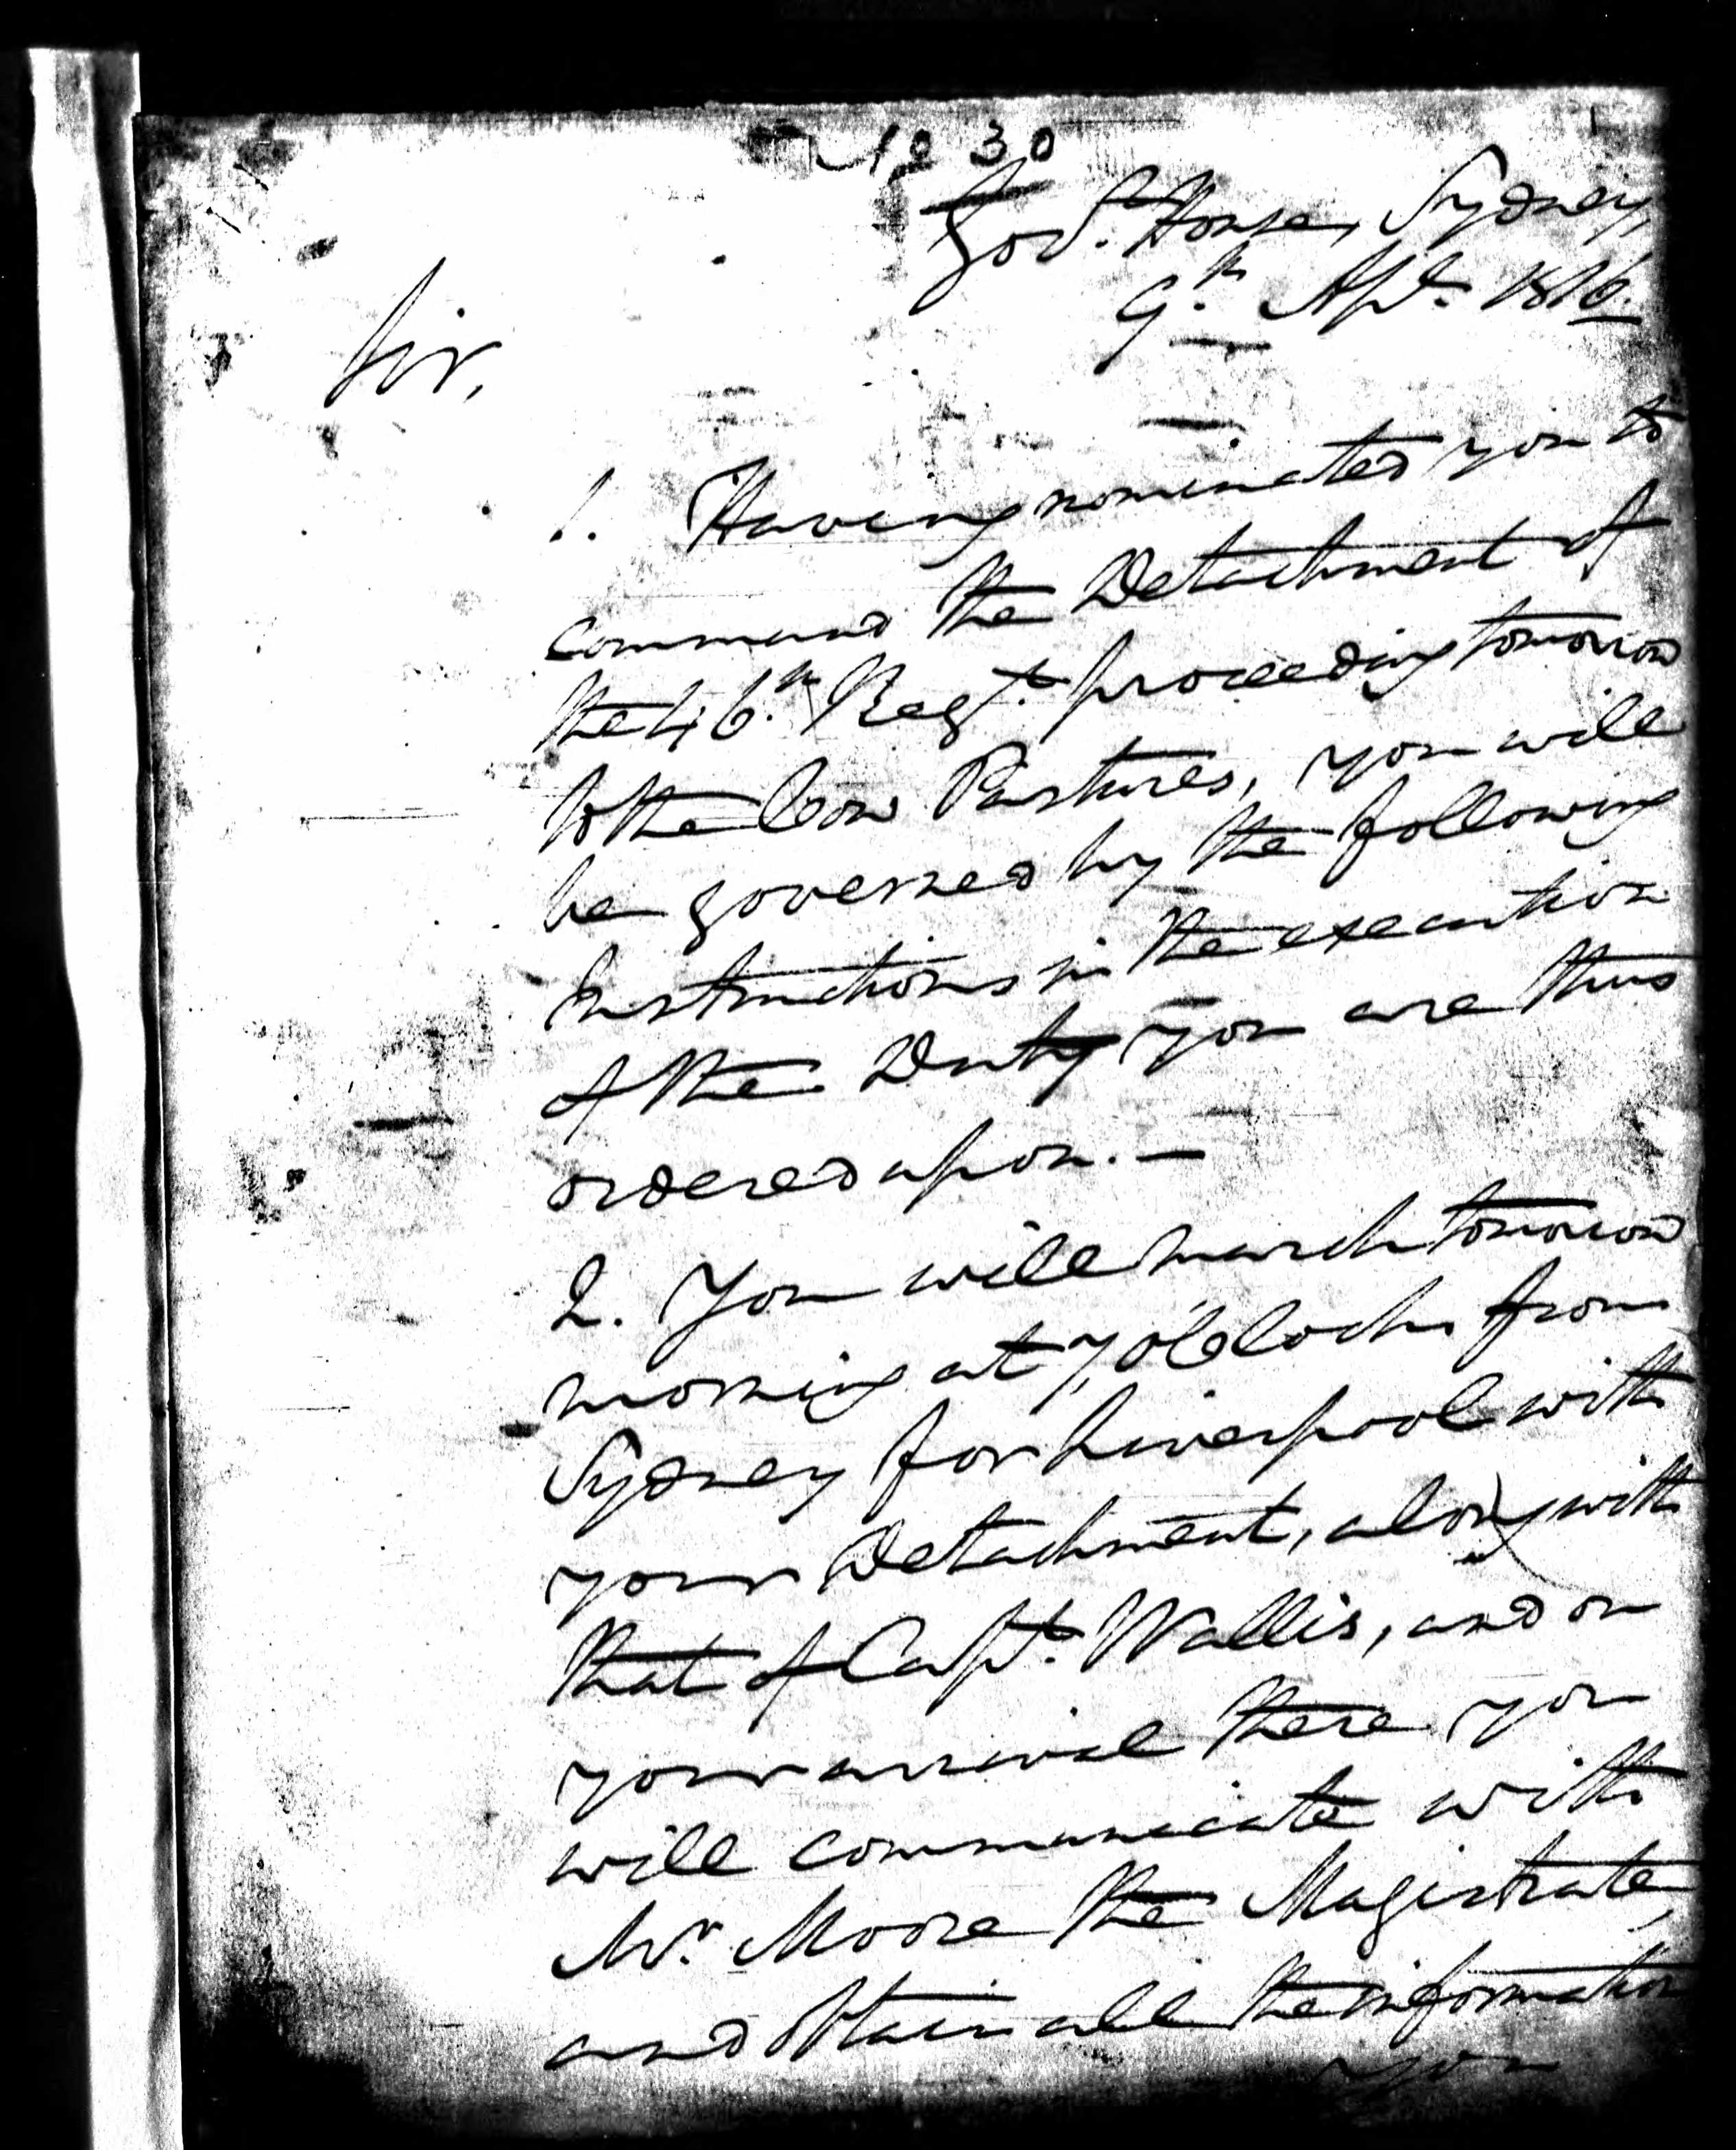 Governor Lachlan Macquarie's instructions to Captain Schaw, page 1